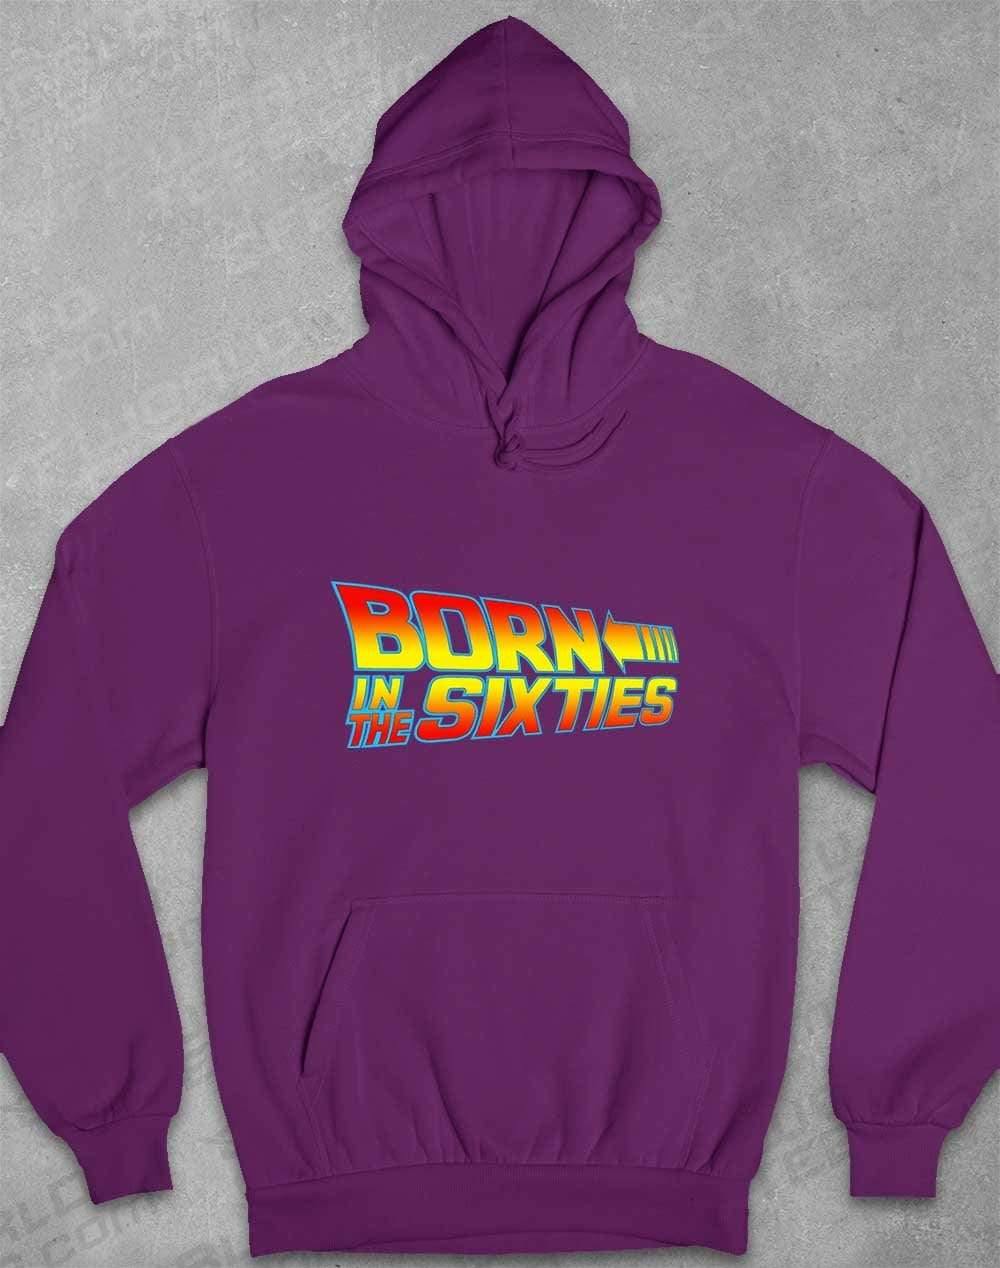 Born in the... (CHOOSE YOUR DECADE!) Hoodie 1960s - Purple / S  - Off World Tees